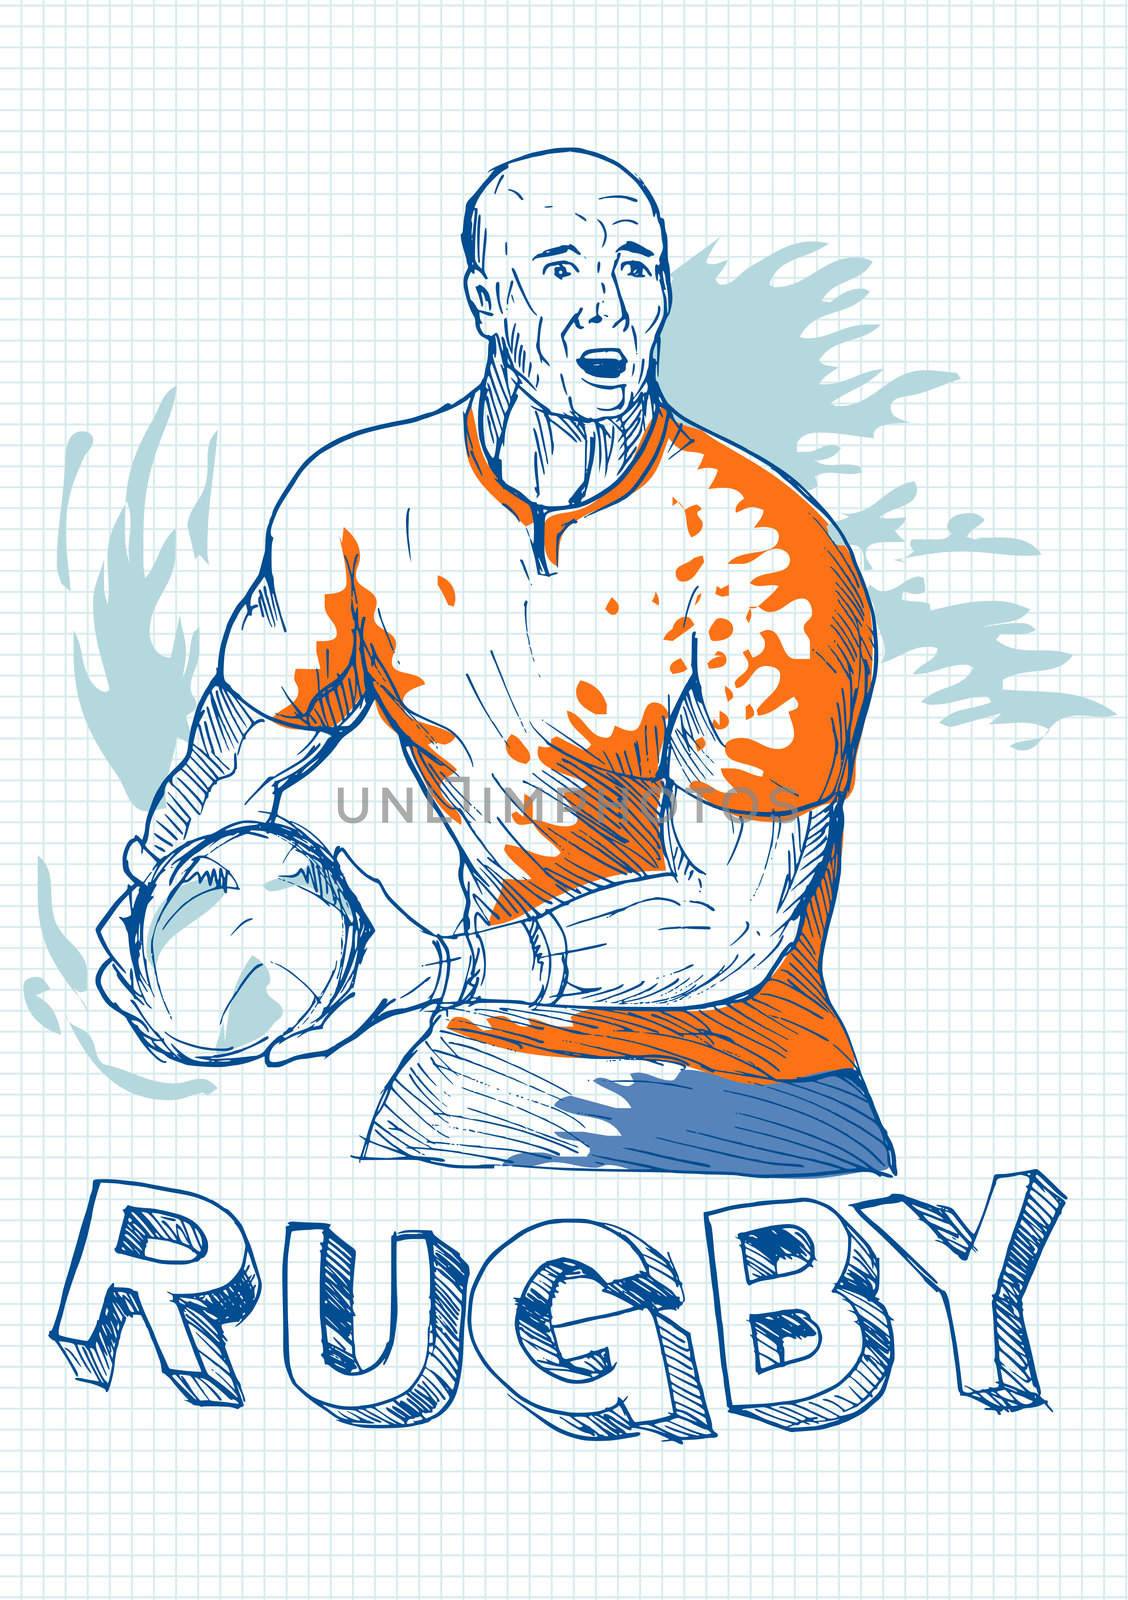 illustration of a hand sketch 
Rugby player running and passing ball with grid in the background.